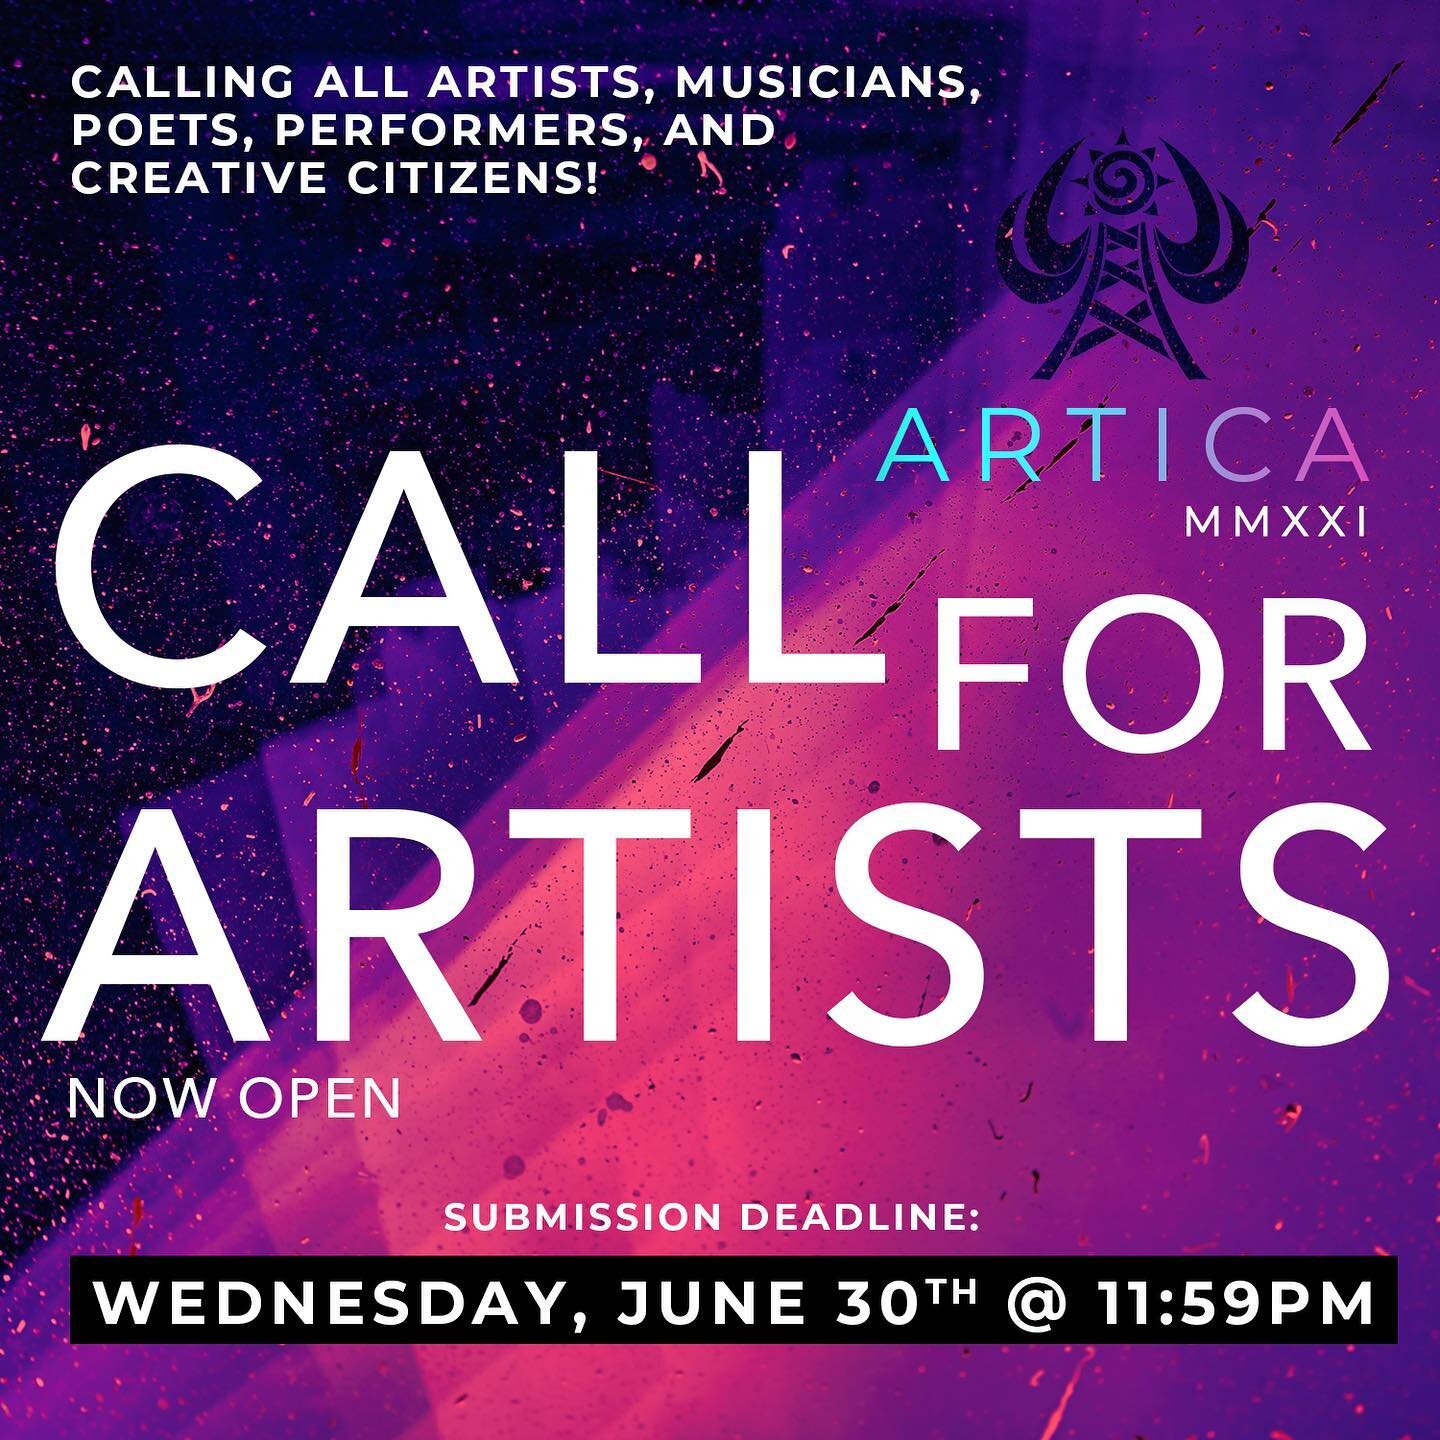 🥳 Artica&rsquo;s Call for Artists is live! The submission deadline is Wednesday, June 30th at 11:59PM (sorry for any previous discrepancy!). Link in bio 👀
.
.
.
Artists and creators are invited to participate at our annual outdoor, multidisciplinar